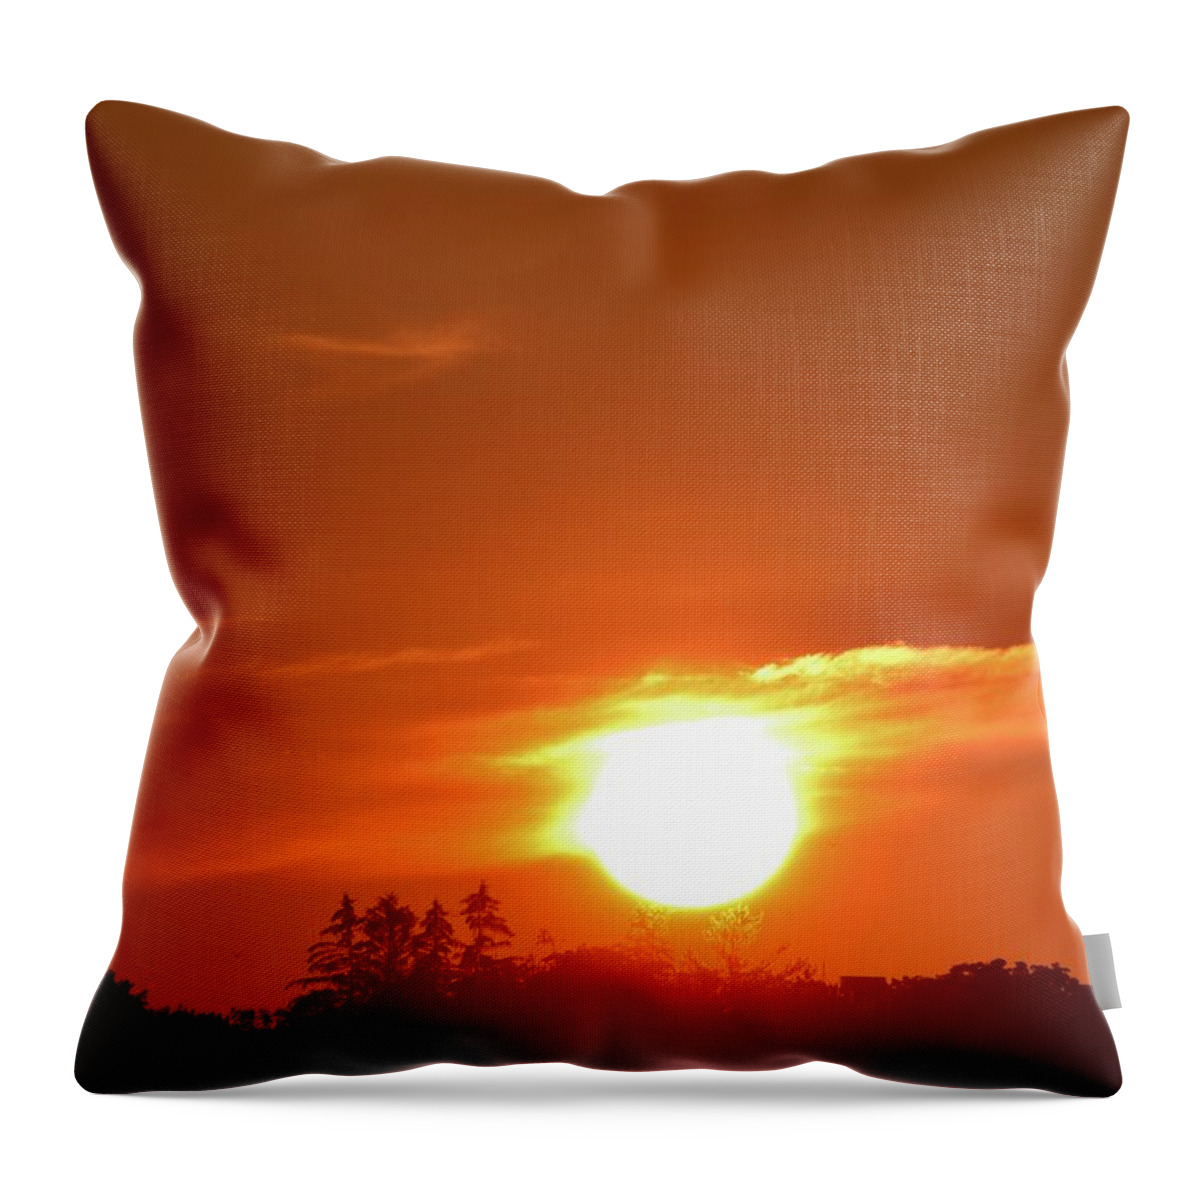 Abstract Throw Pillow featuring the photograph When The Sun Touches The Trees by Lyle Crump